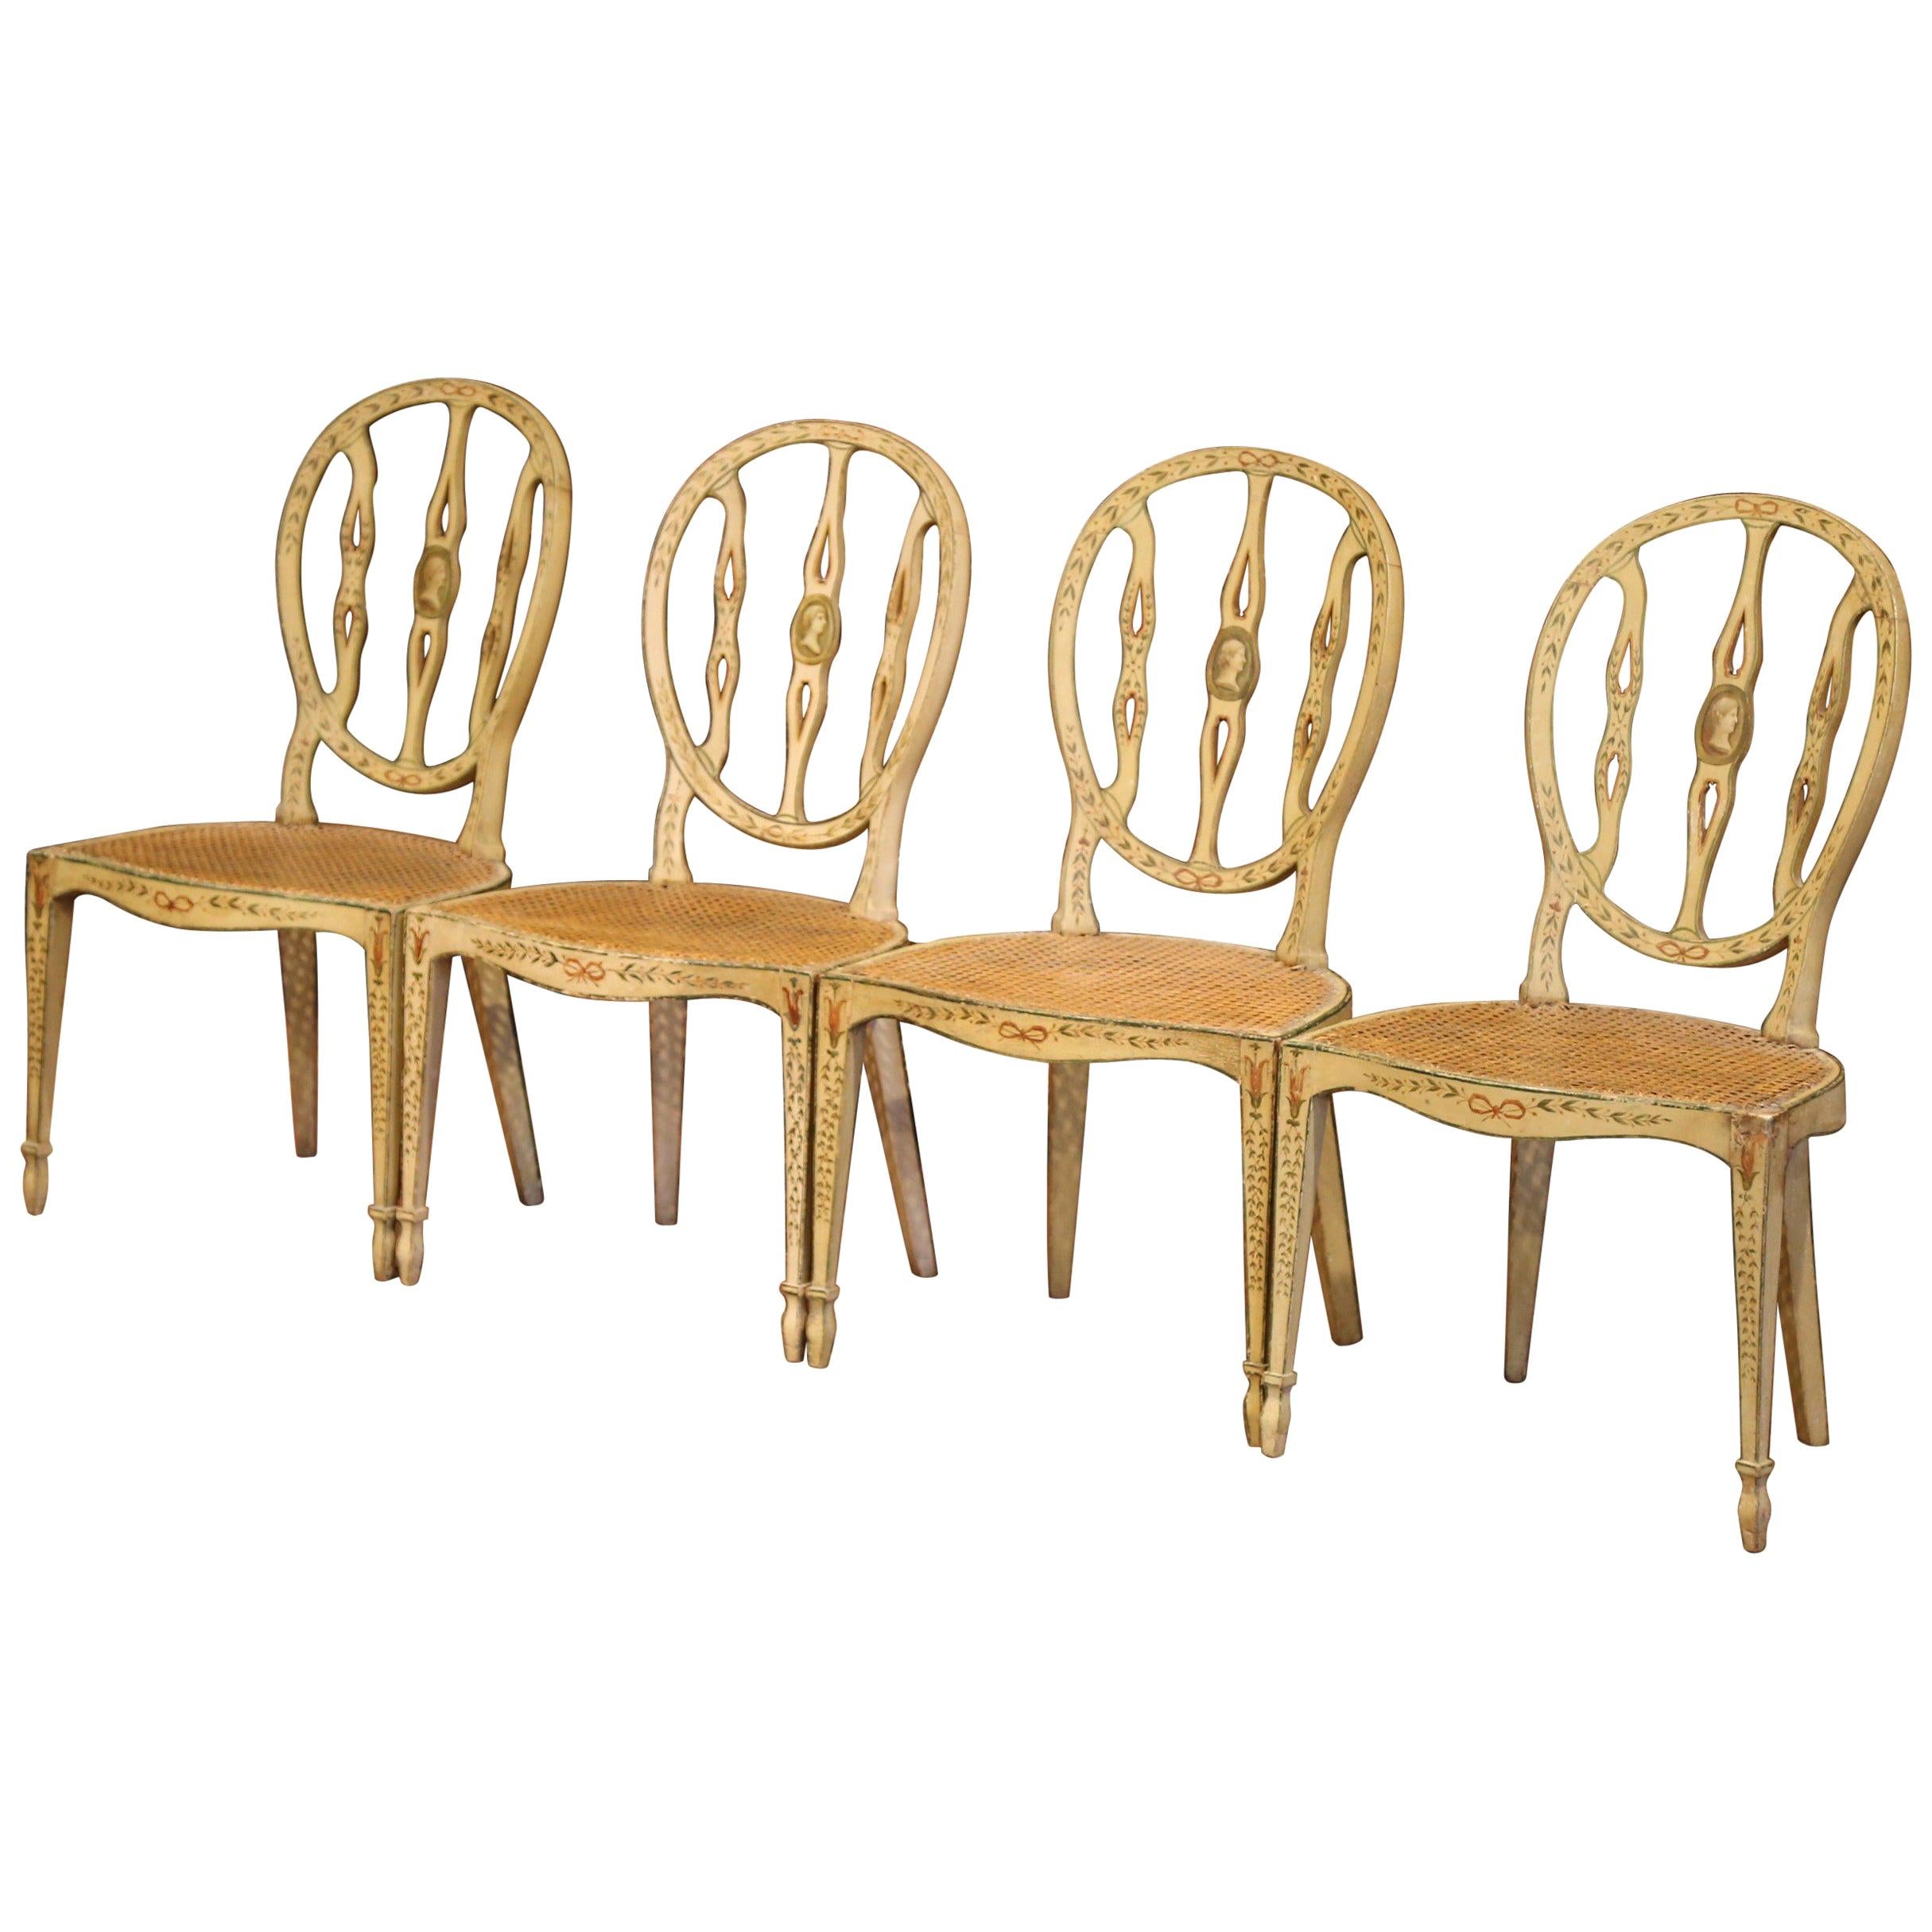 Set of Four Mid-19th Century Hepplewhite Style Painted Chairs with Cane Seat